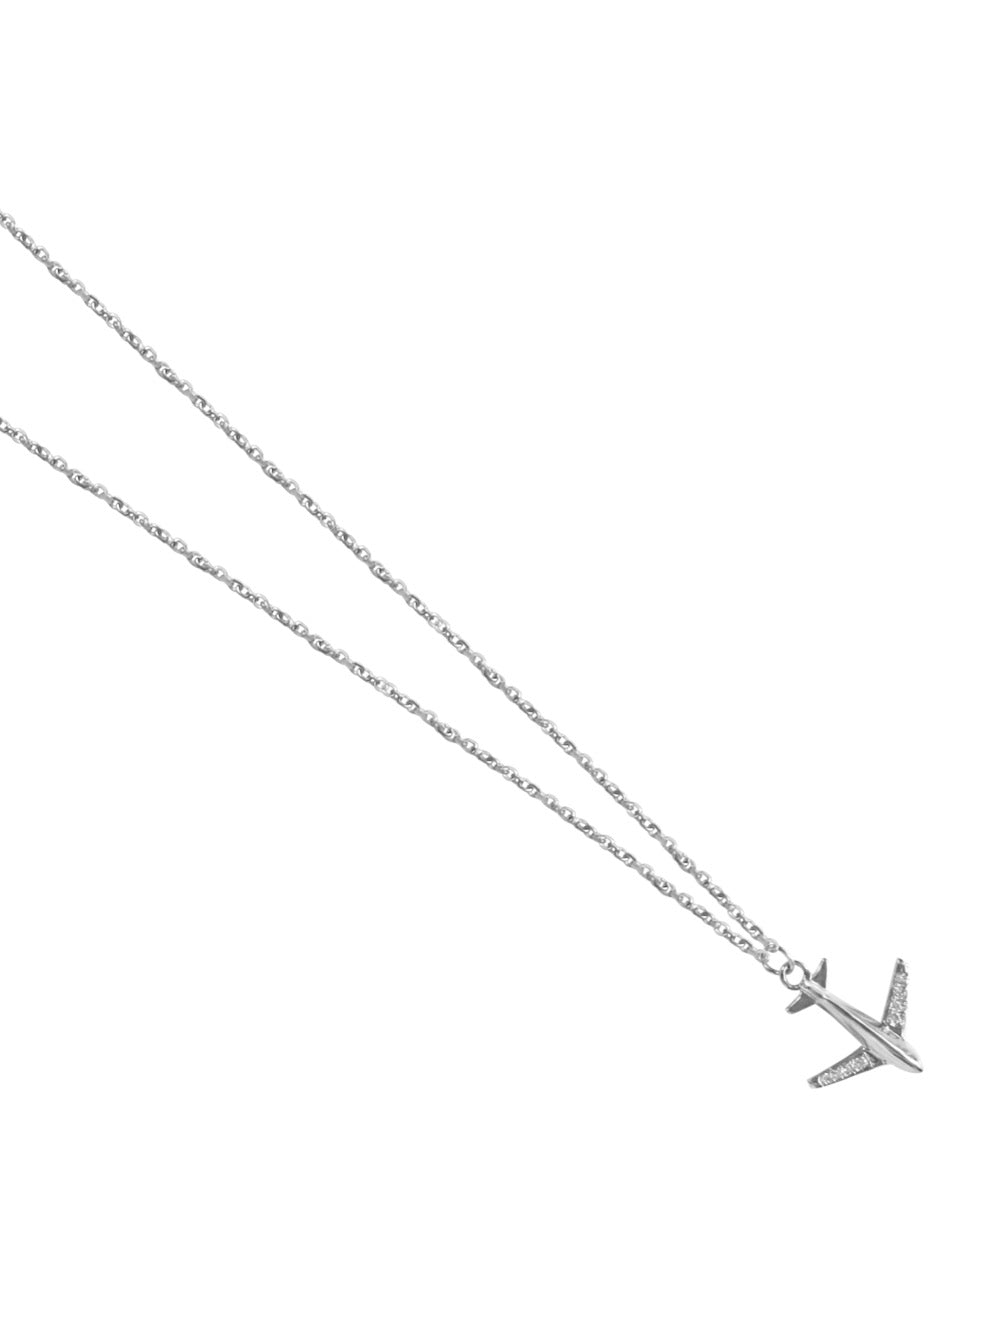 airplane necklace with white pearls in gold / silver